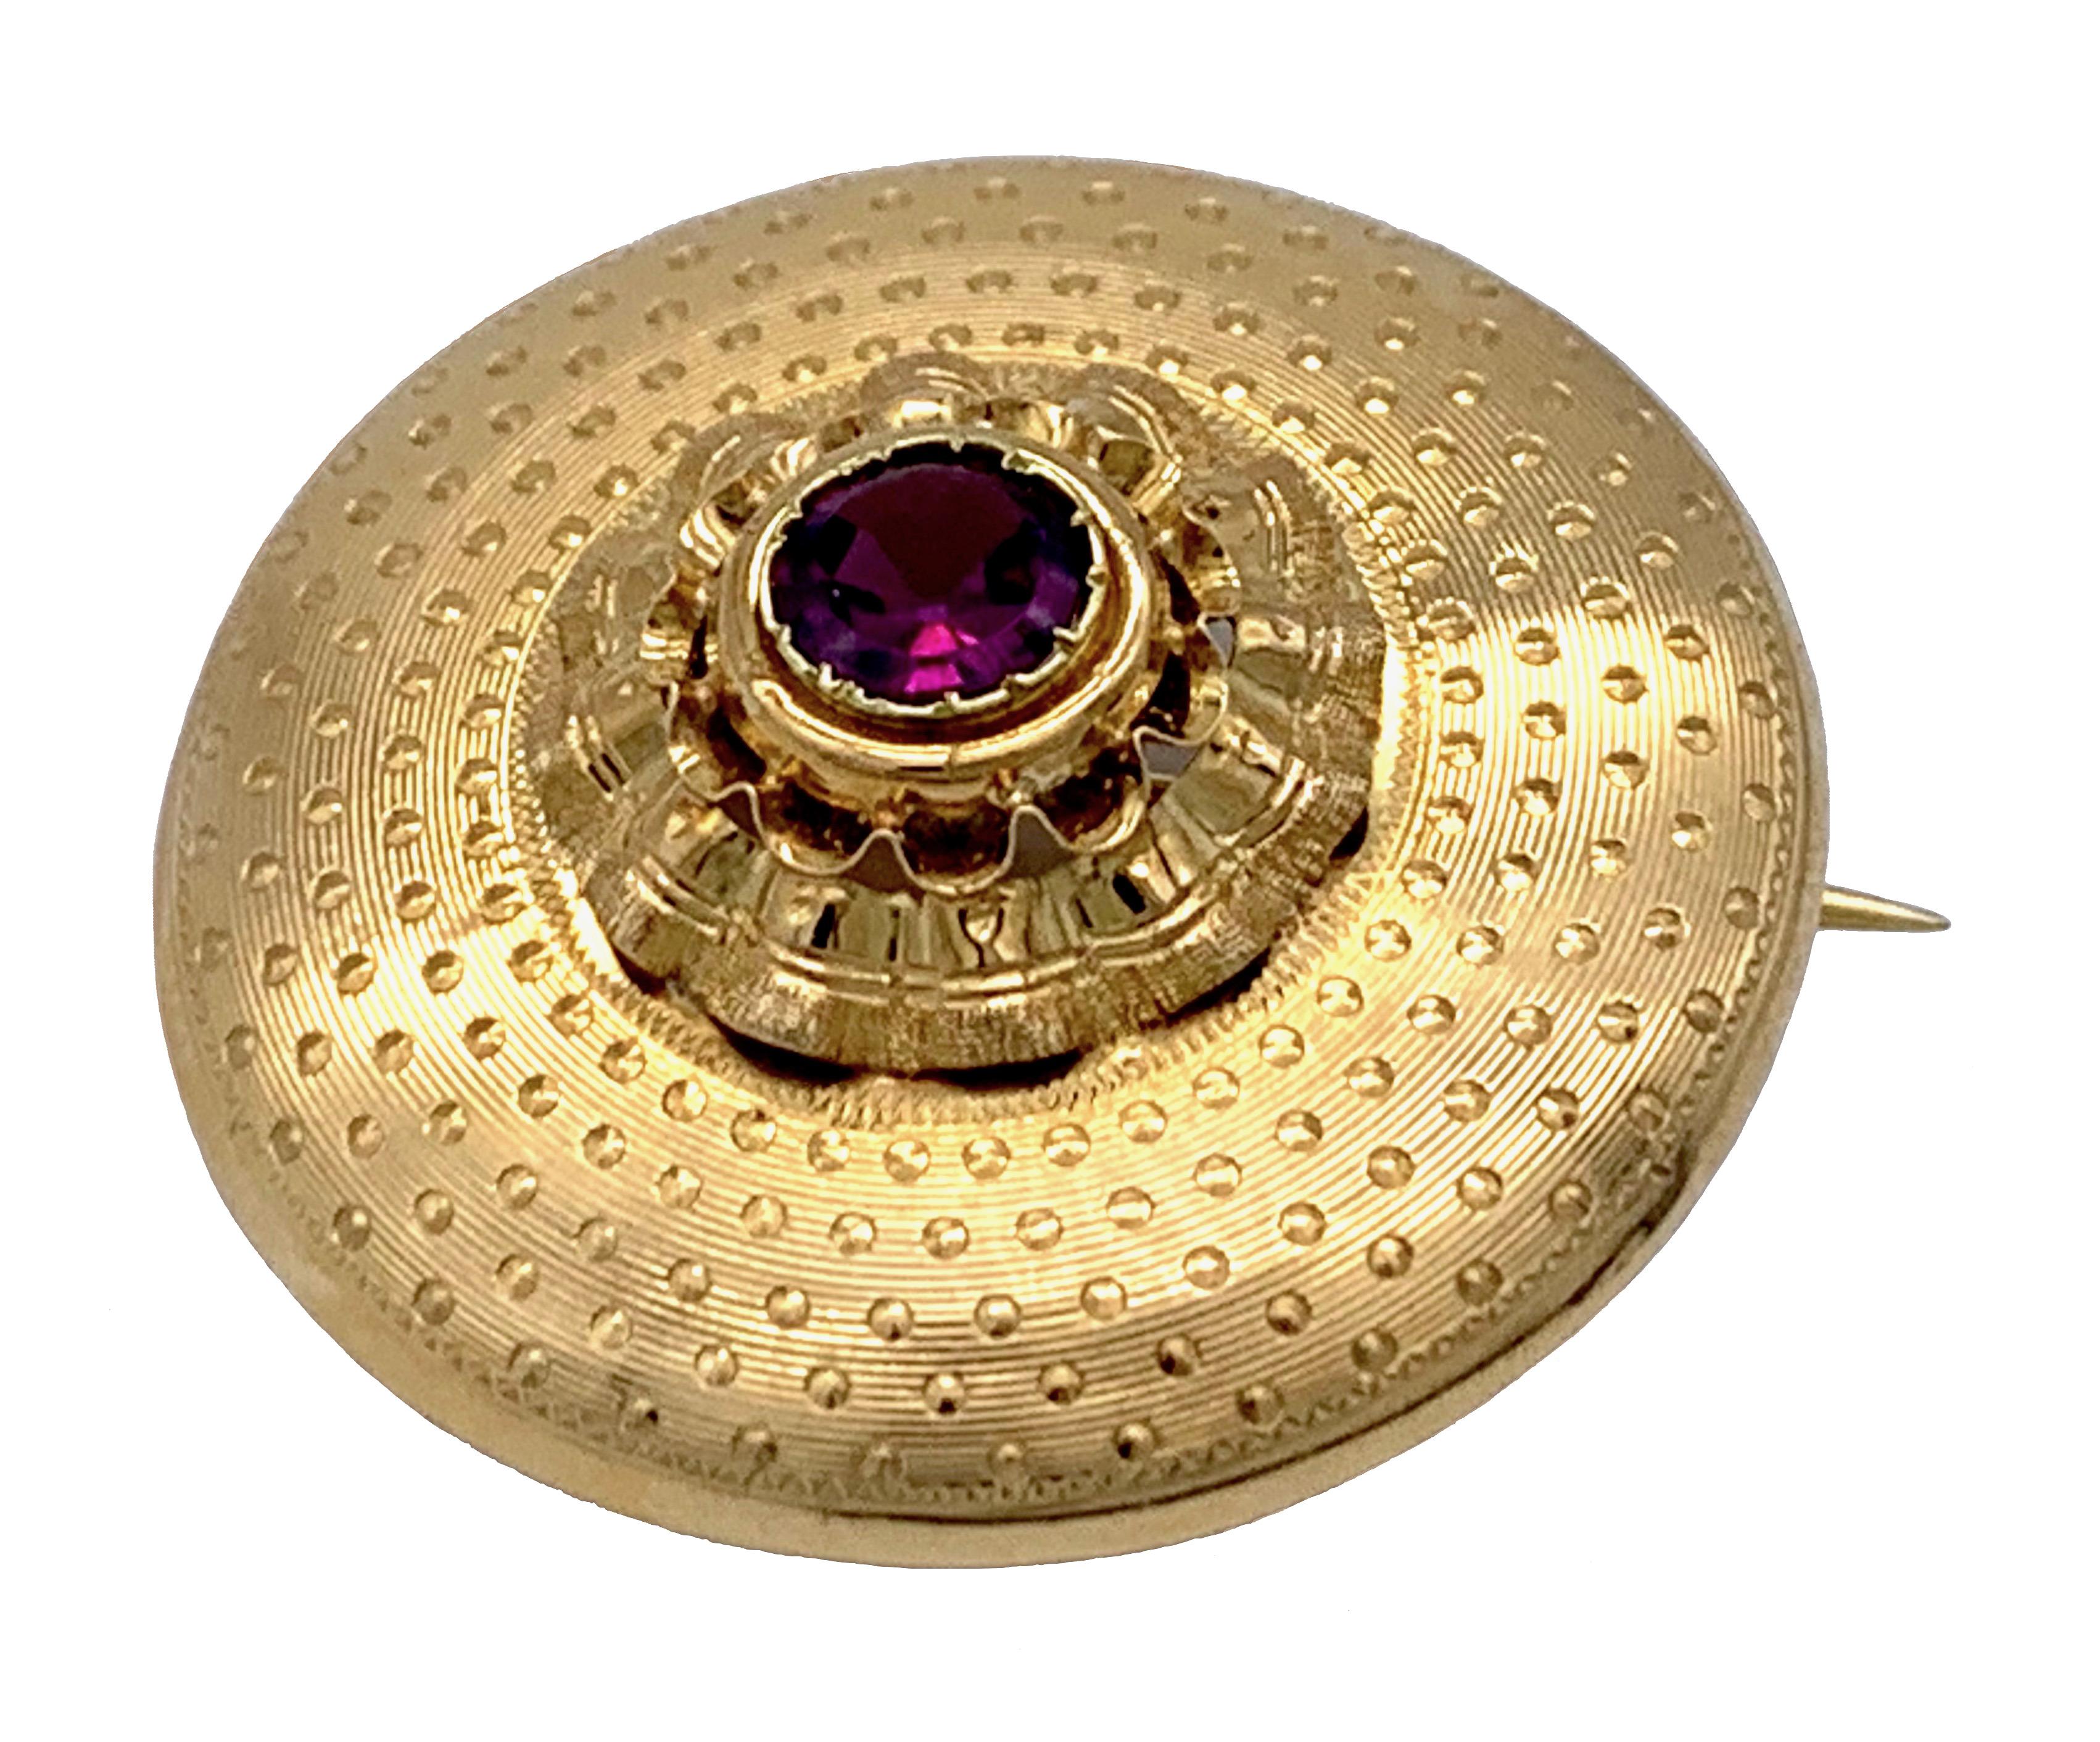 This magnificent target brooch is in truly wonderful condition and has been made out of 18 karat yellow gold by a French master goldsmith in 1865 ca. It is marked with a French maker's mark in a lozenge, the second initial being a B. The jewel is